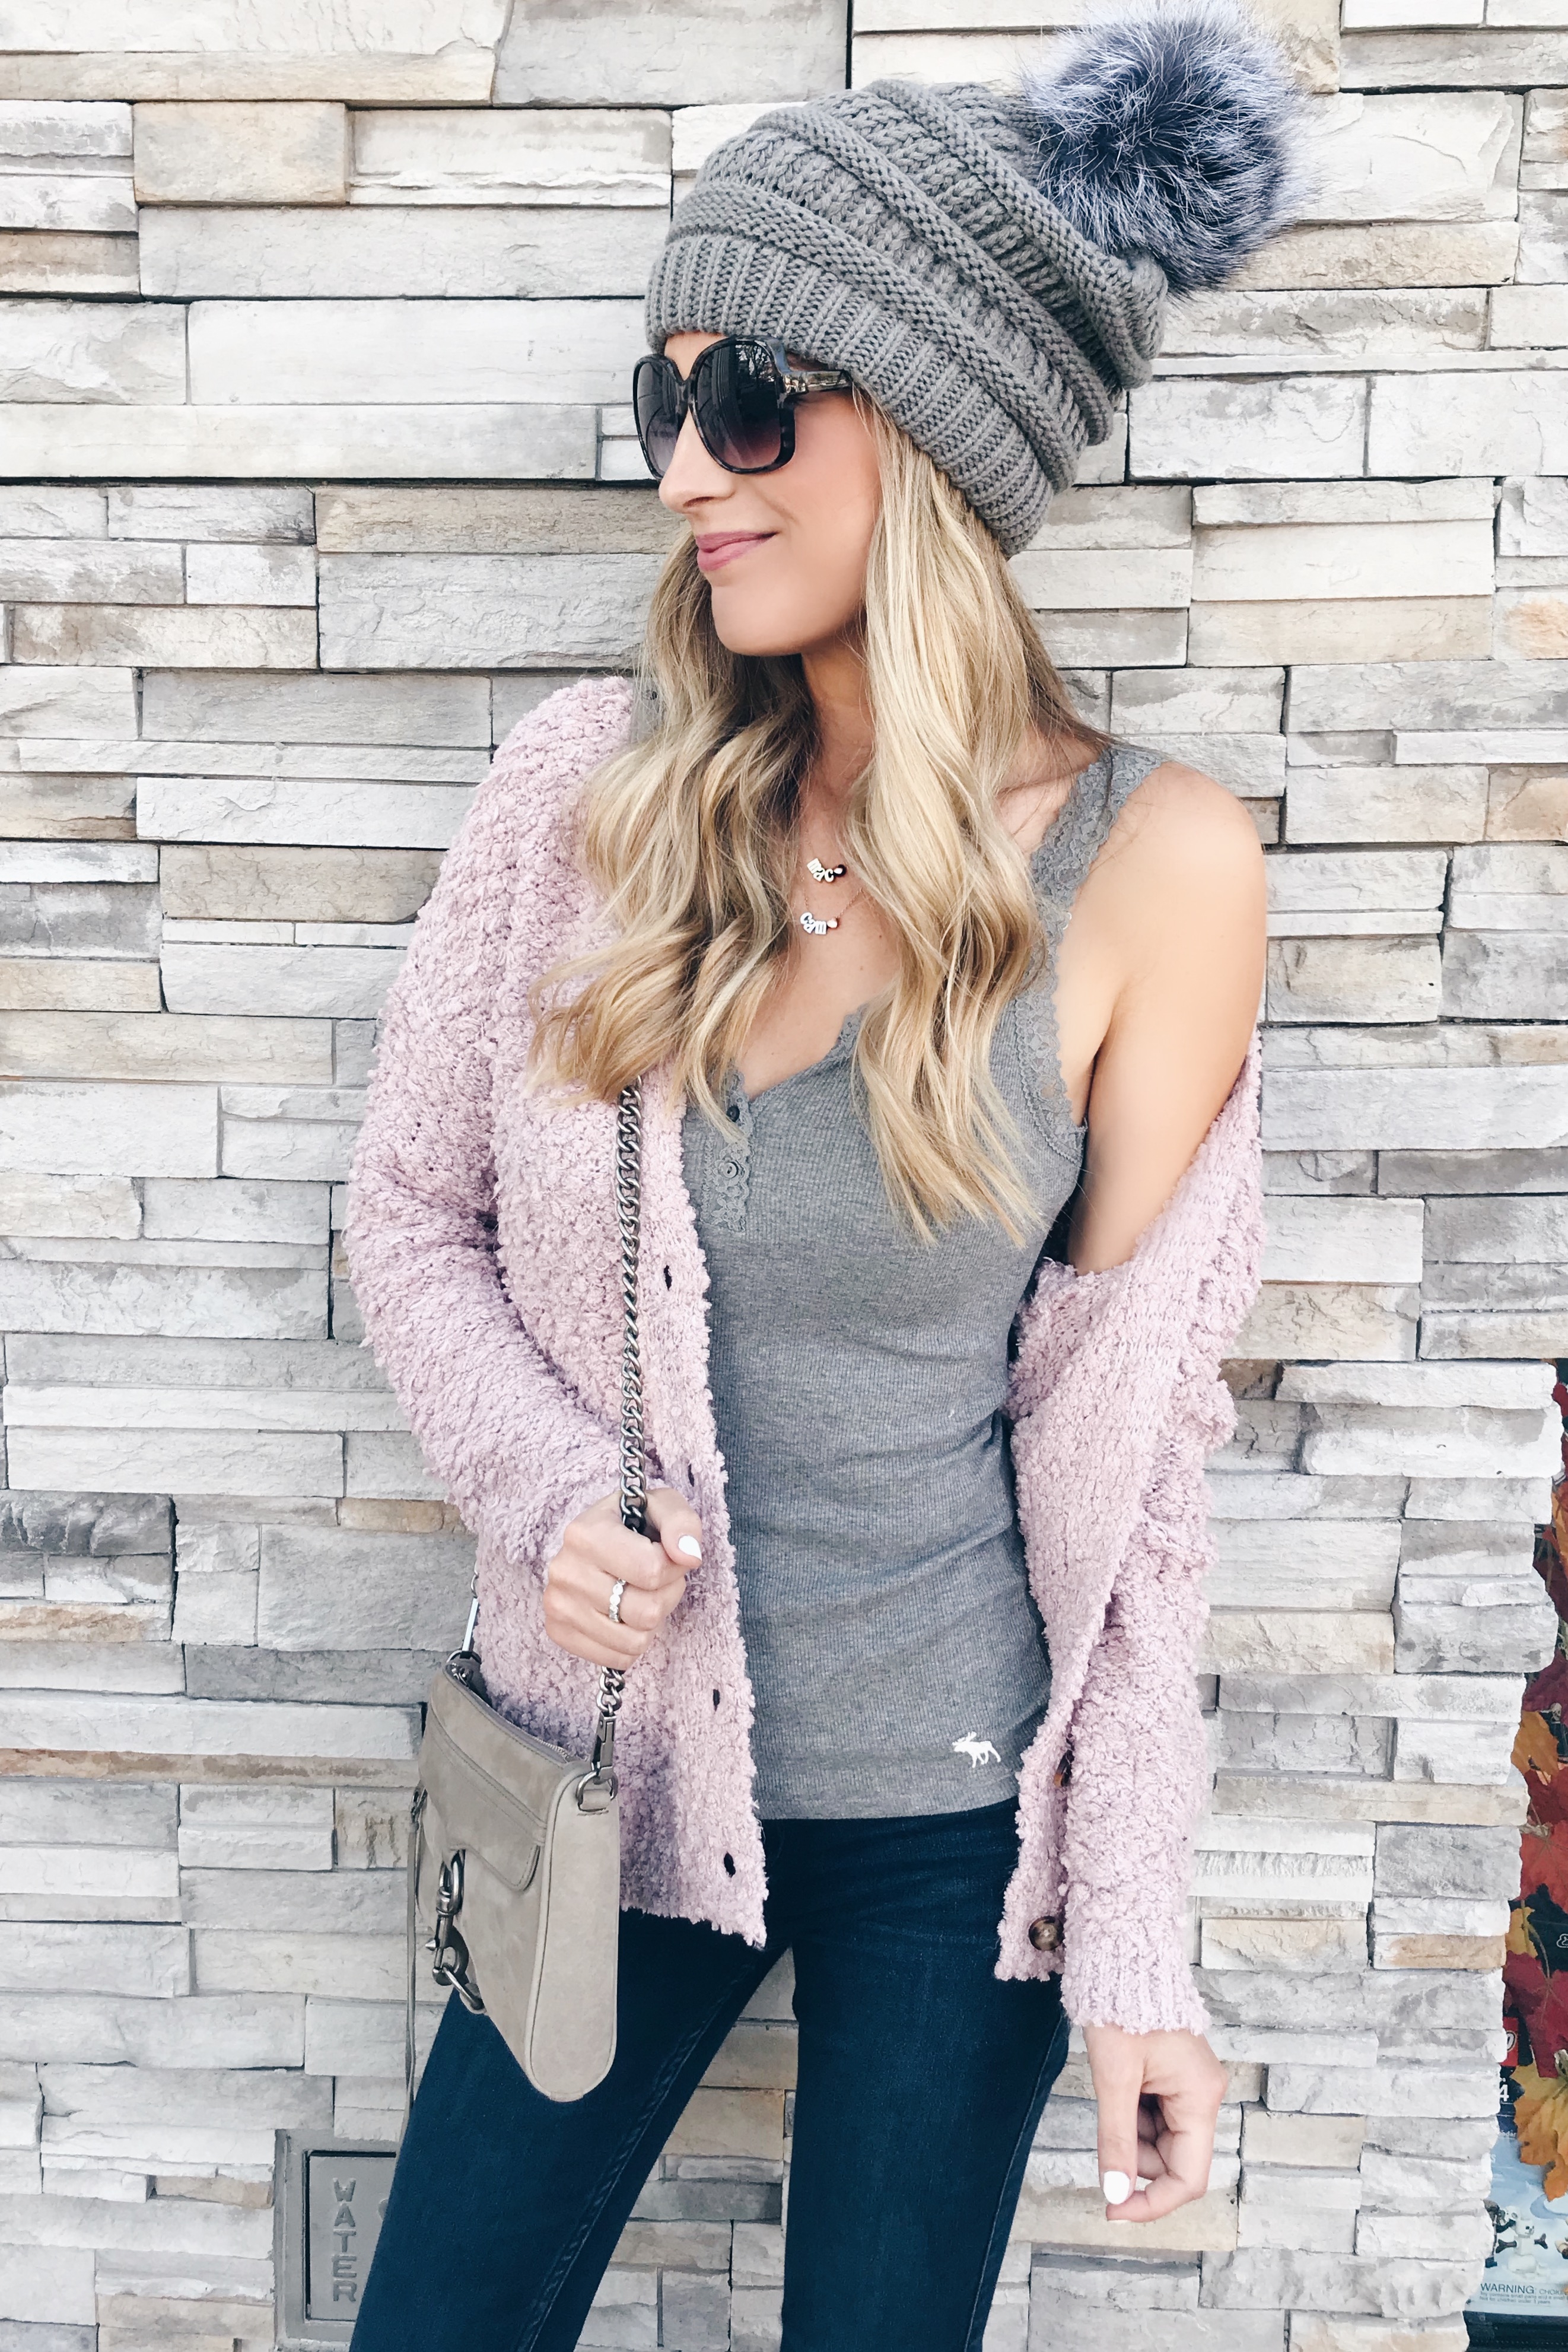 Chunky knit cardigan outfit ideas